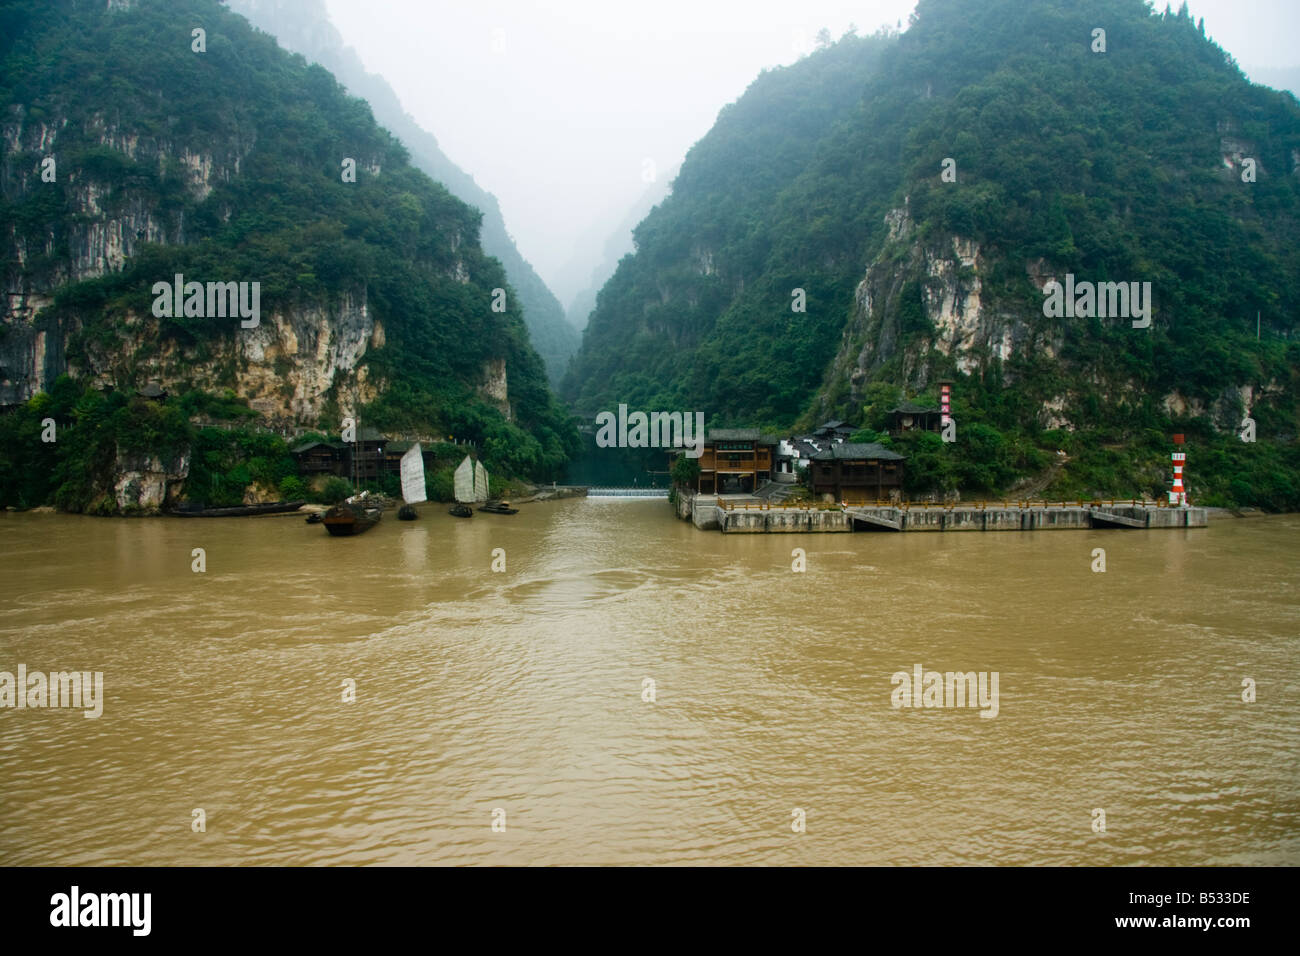 Traditional Chinese boats and small buildings on the shores of the Yangtze River, China Stock Photo